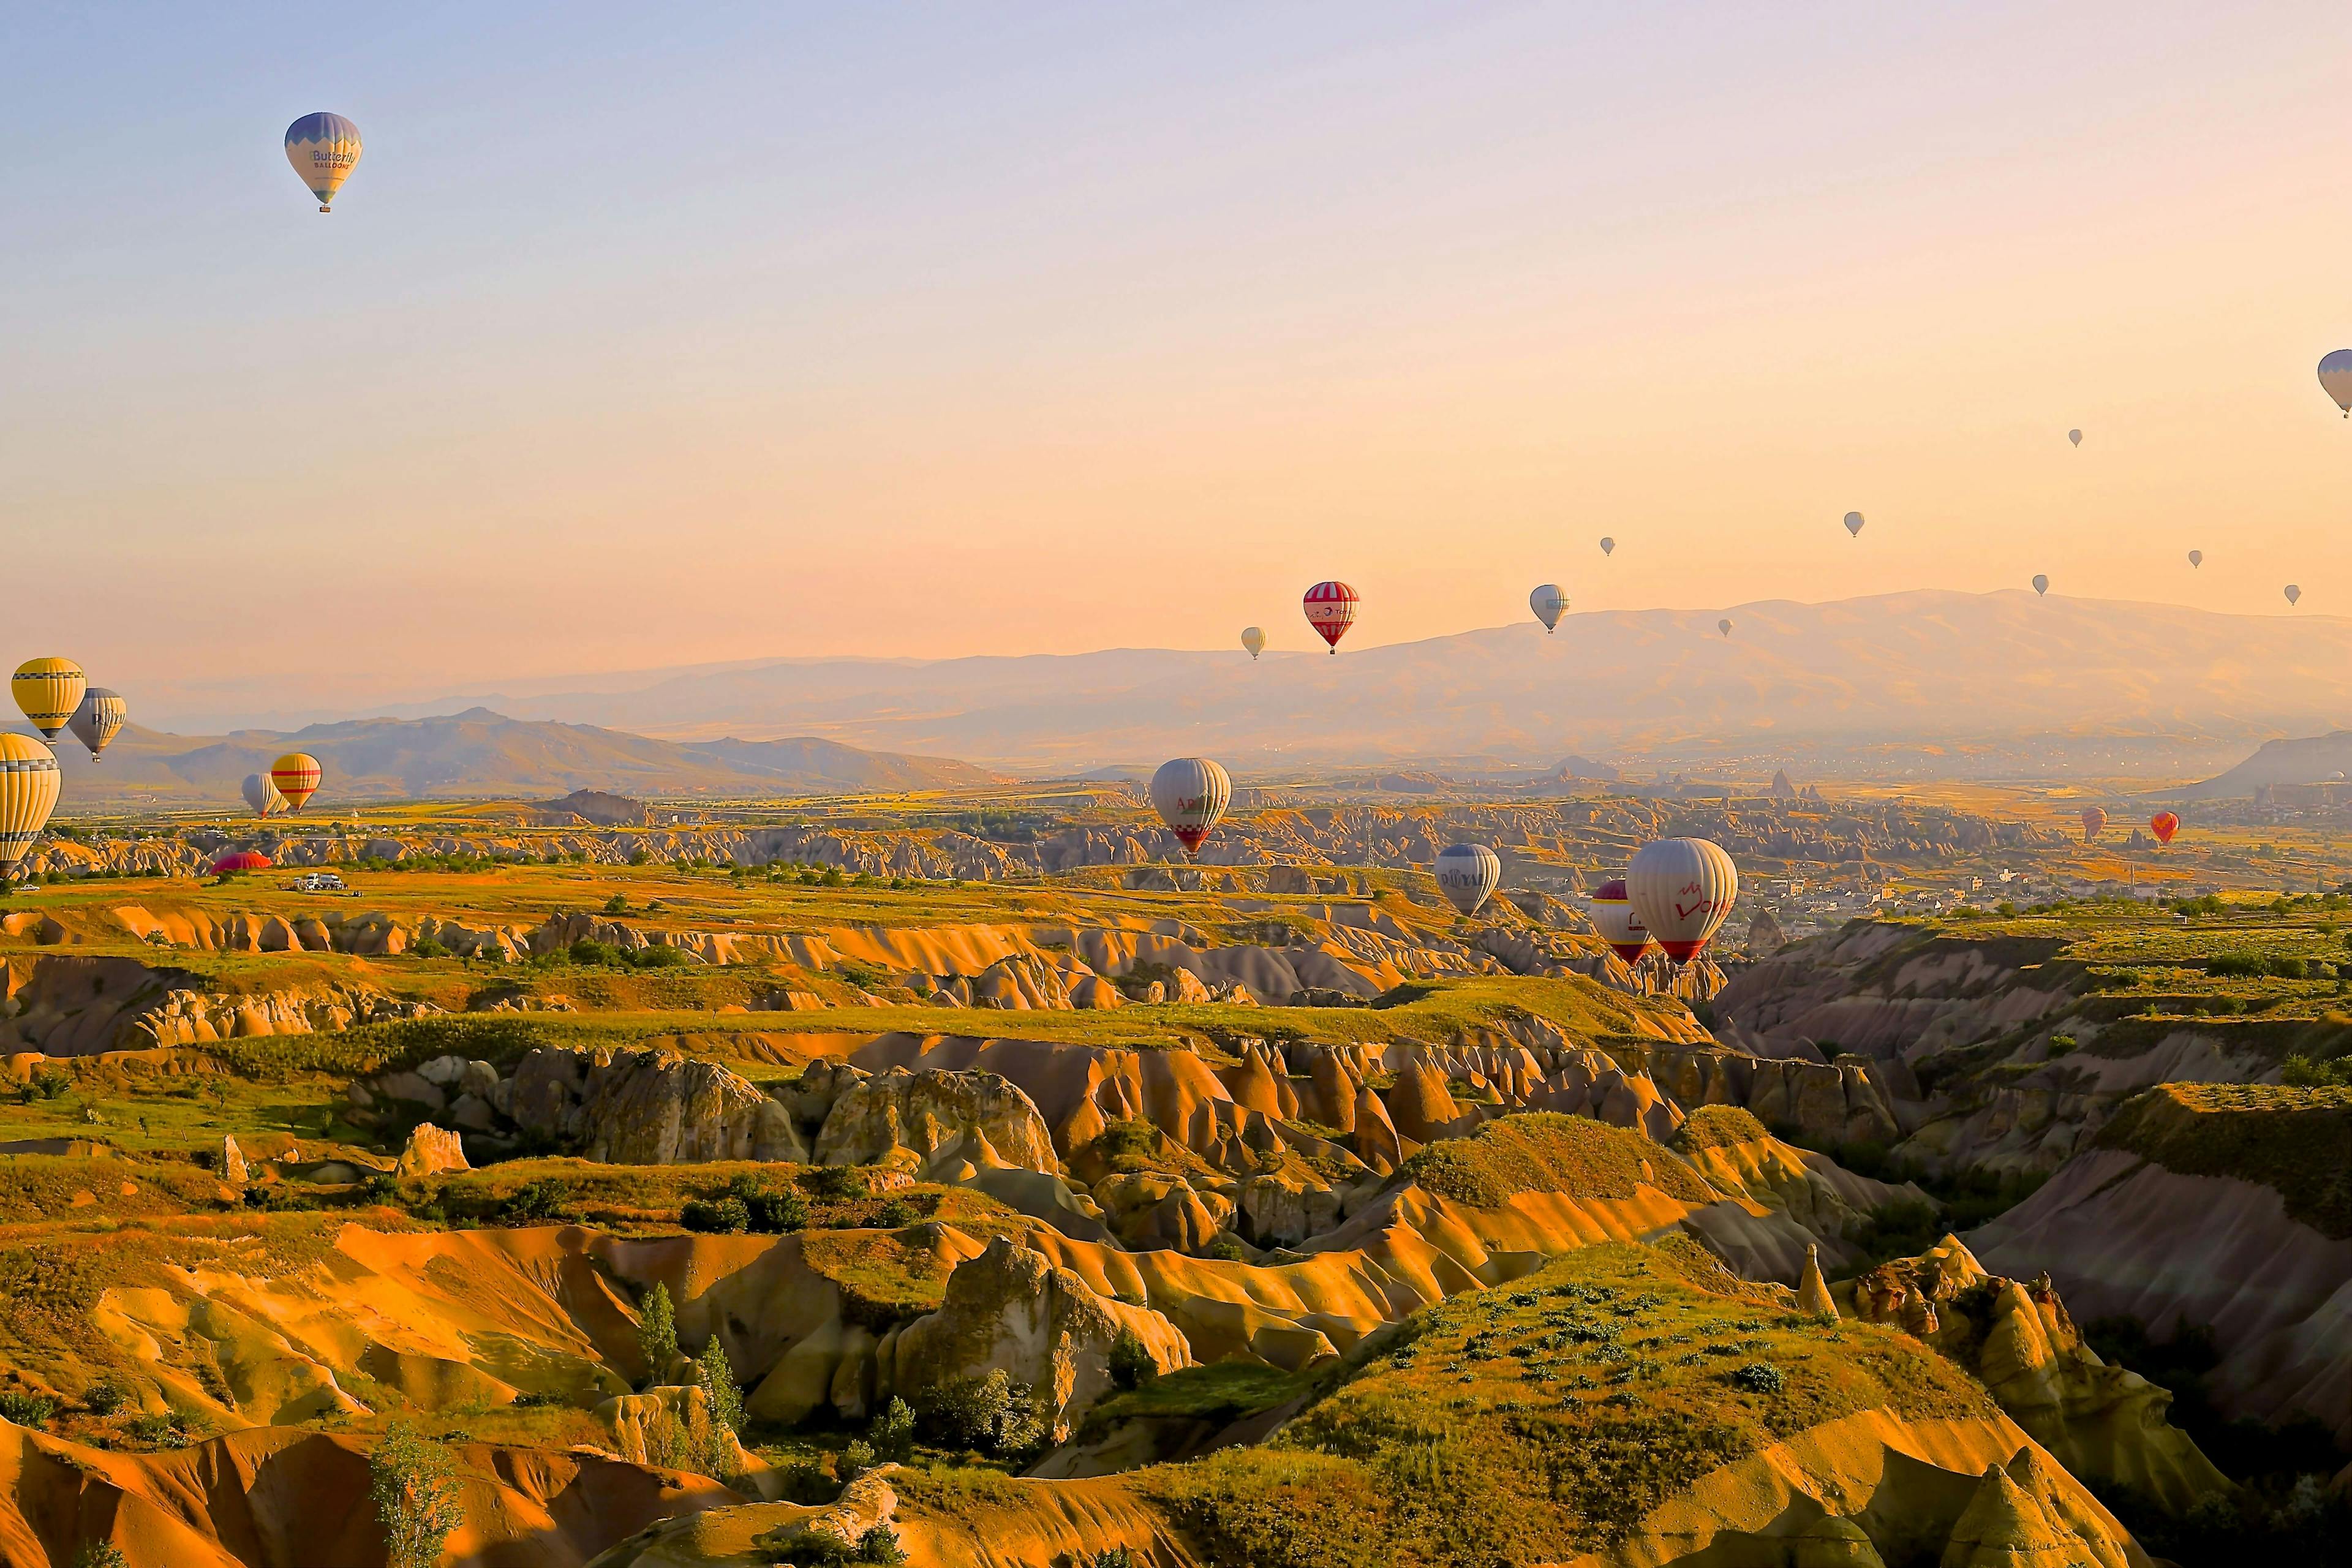 beautiful sunrise over Cappadocia, hundreds of hot air balloons can be seen in the sky